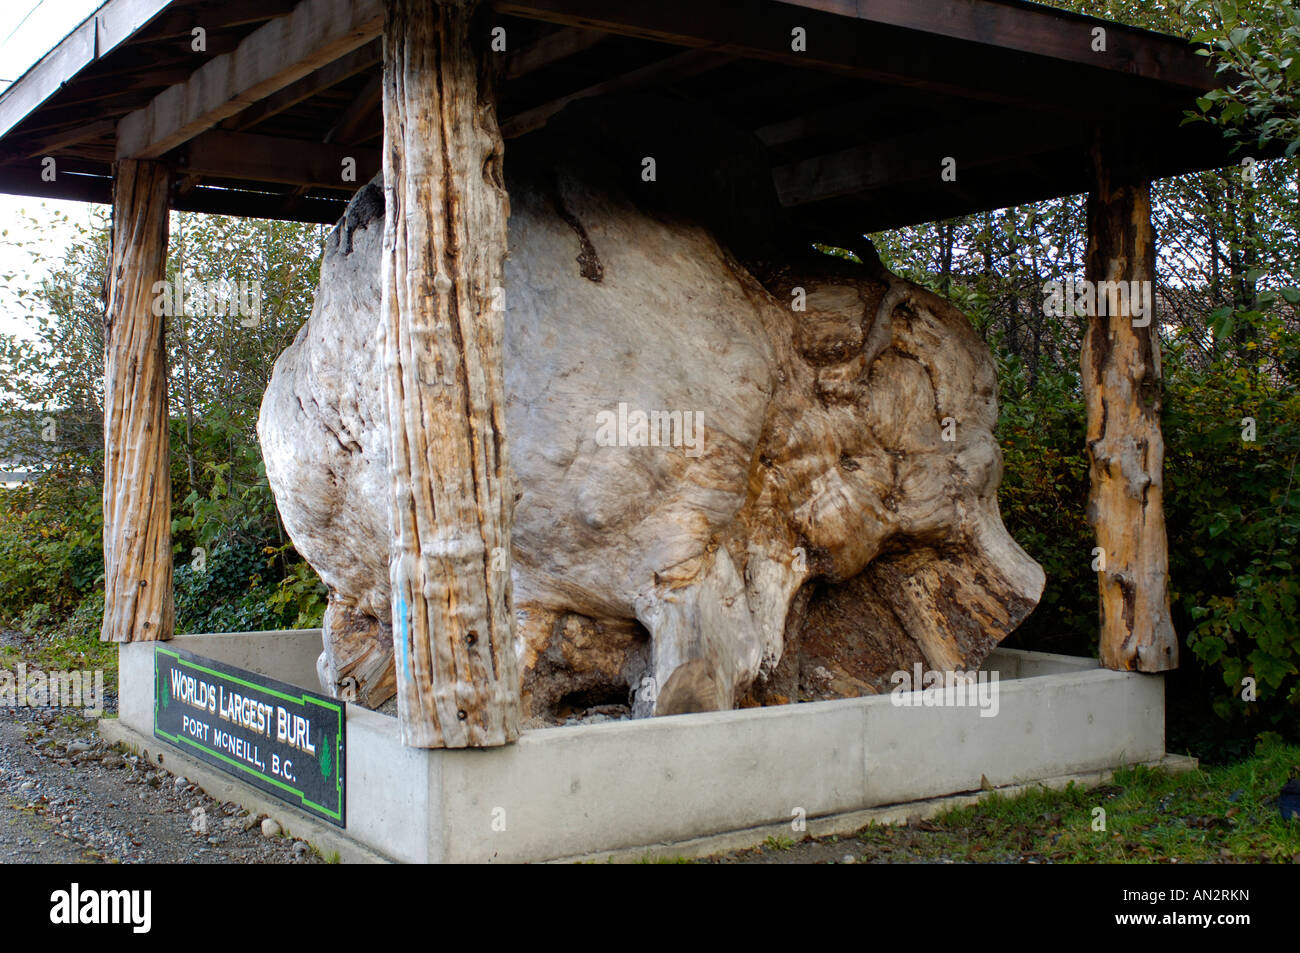 The Largest tree Burl in the World displayed at Port Mc Neill, Vancouver Island BC. Canada. BCX 0224. Stock Photo